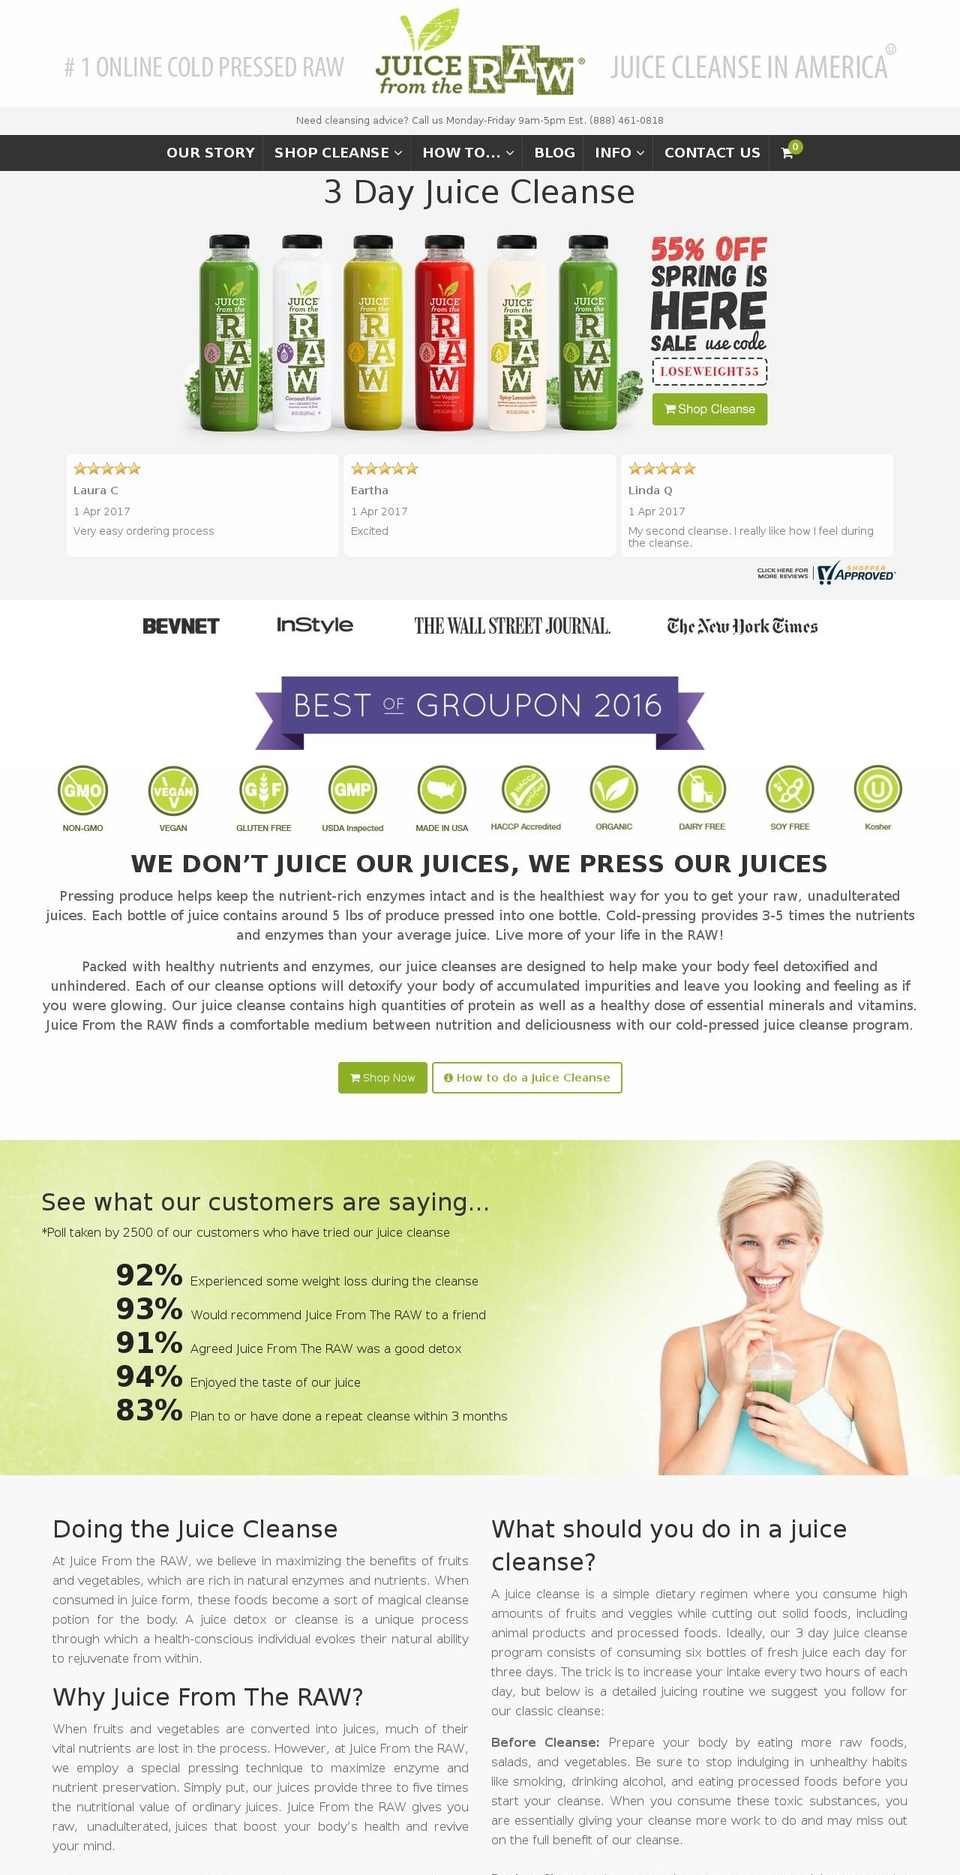 Pop Shopify theme site example juicefromtheraw.com